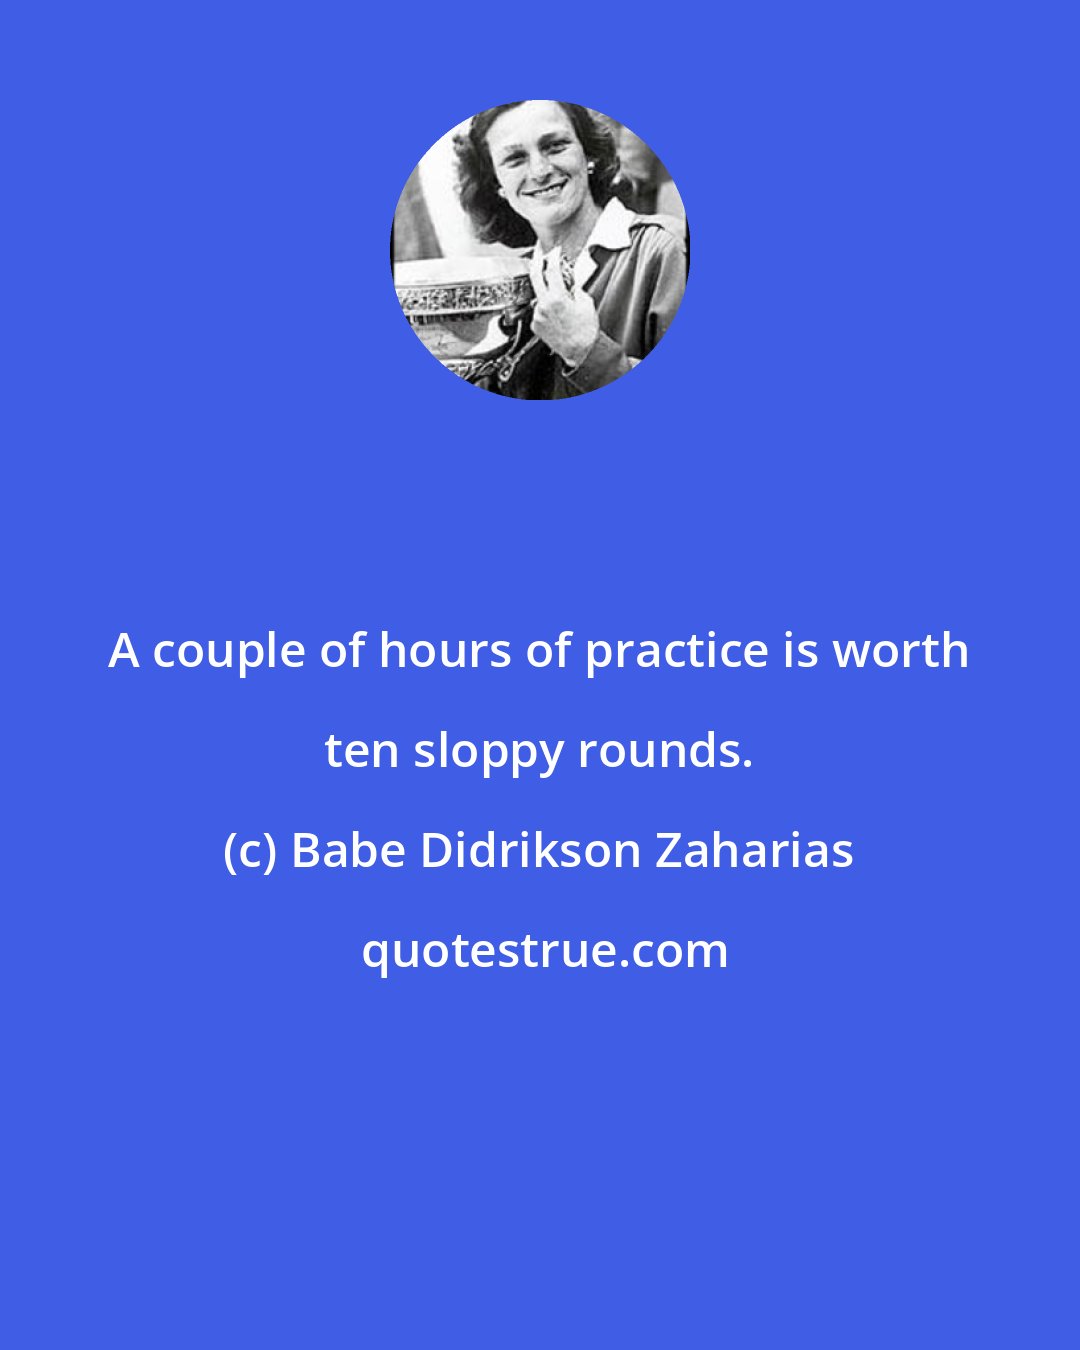 Babe Didrikson Zaharias: A couple of hours of practice is worth ten sloppy rounds.